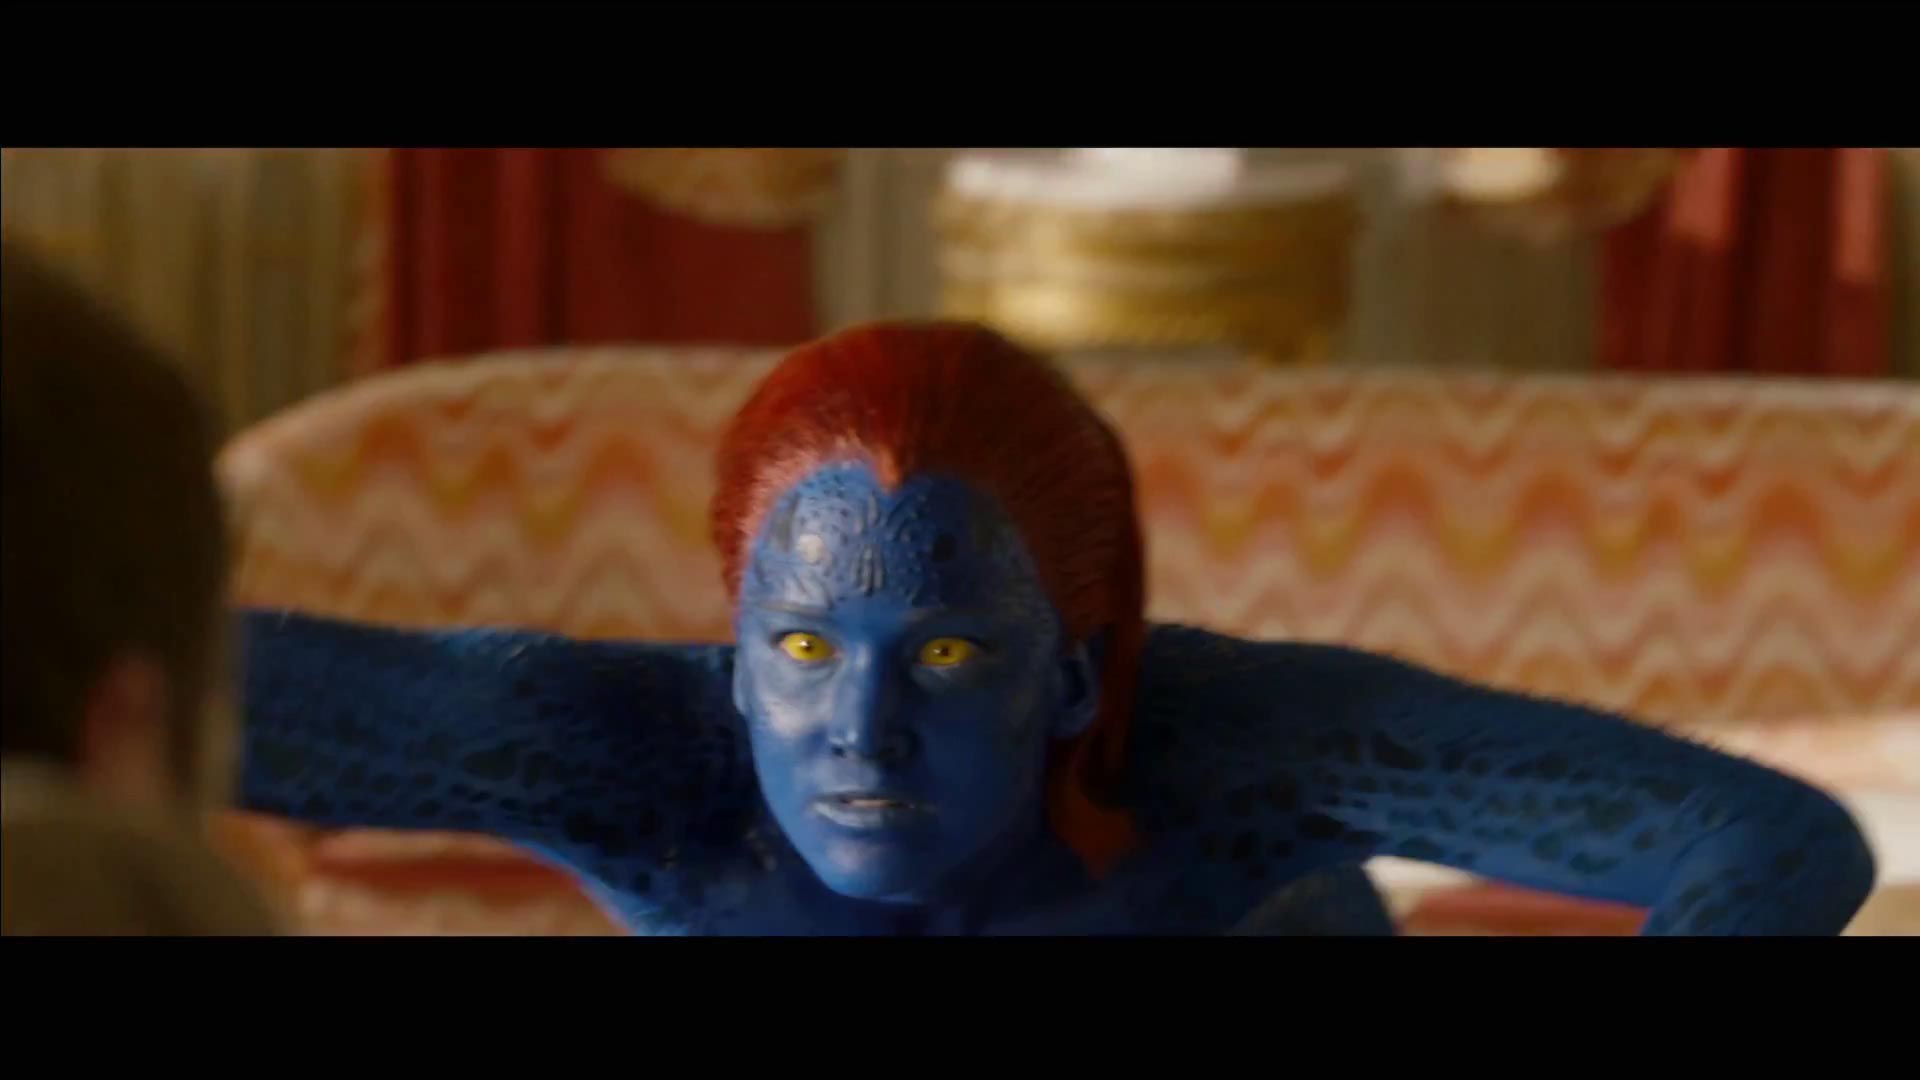 Jennifer Lawrence is found out, turns blue as mutant Mystique